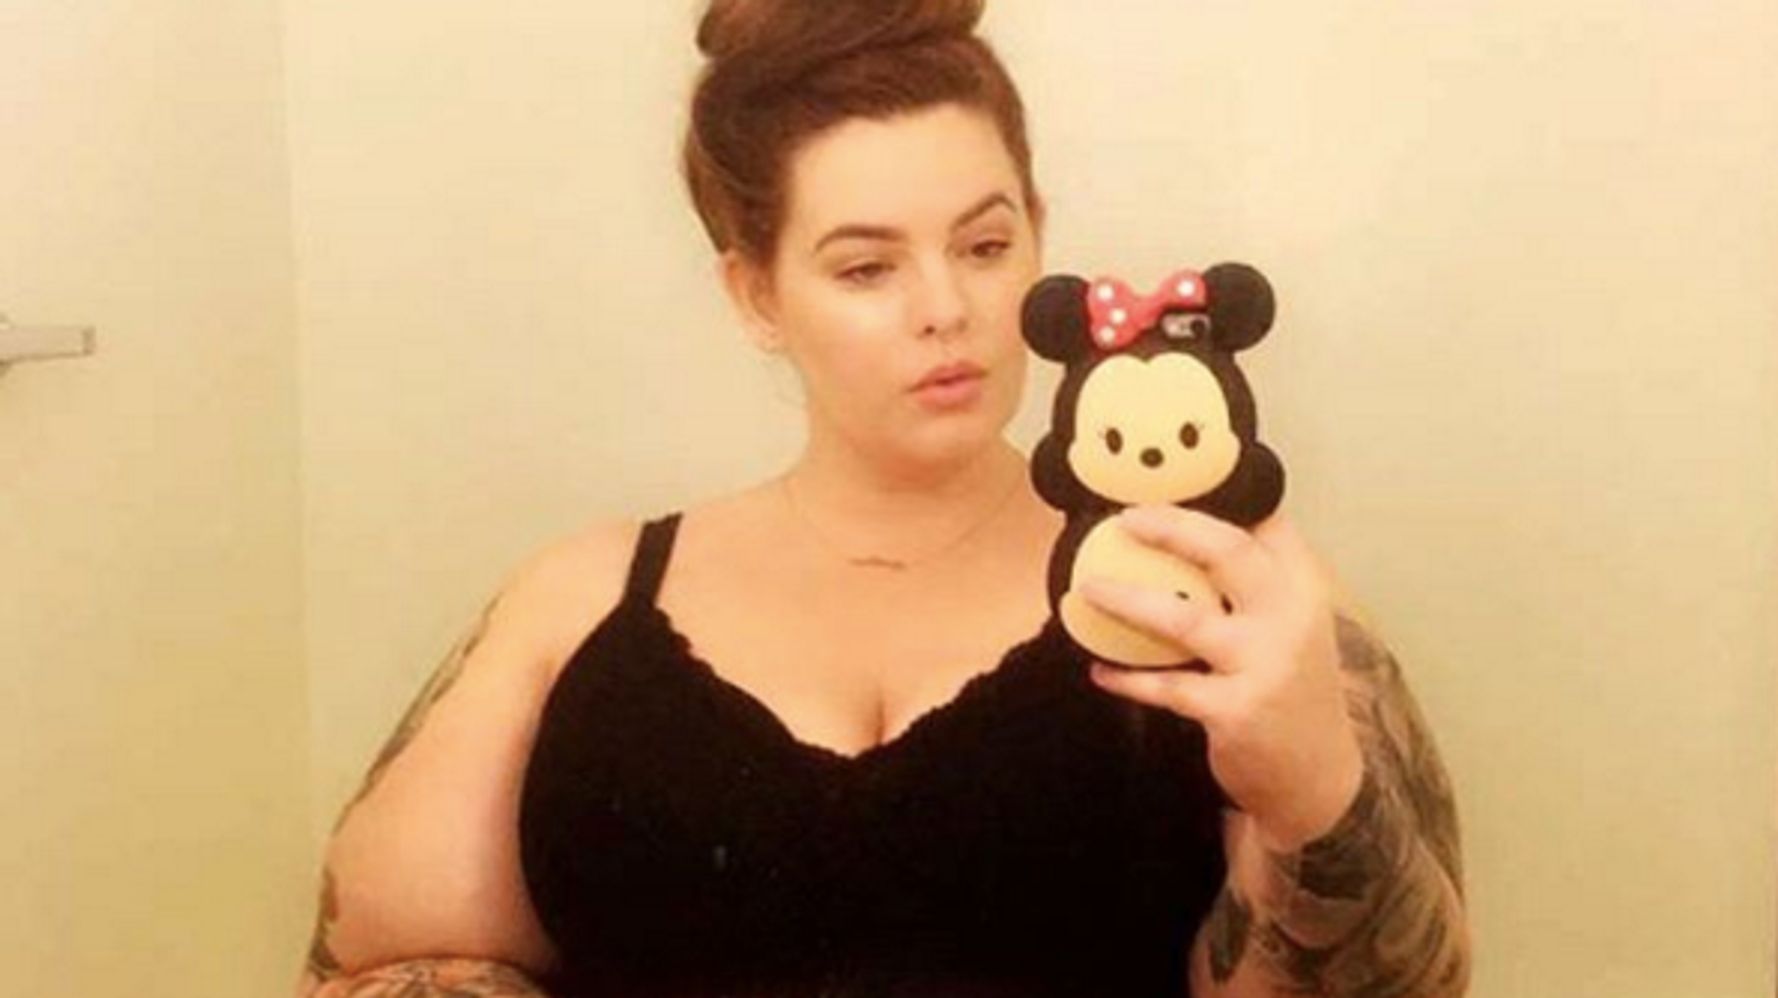 This Plus-Size Pregnant Model Won't Put Up With Body-Shaming